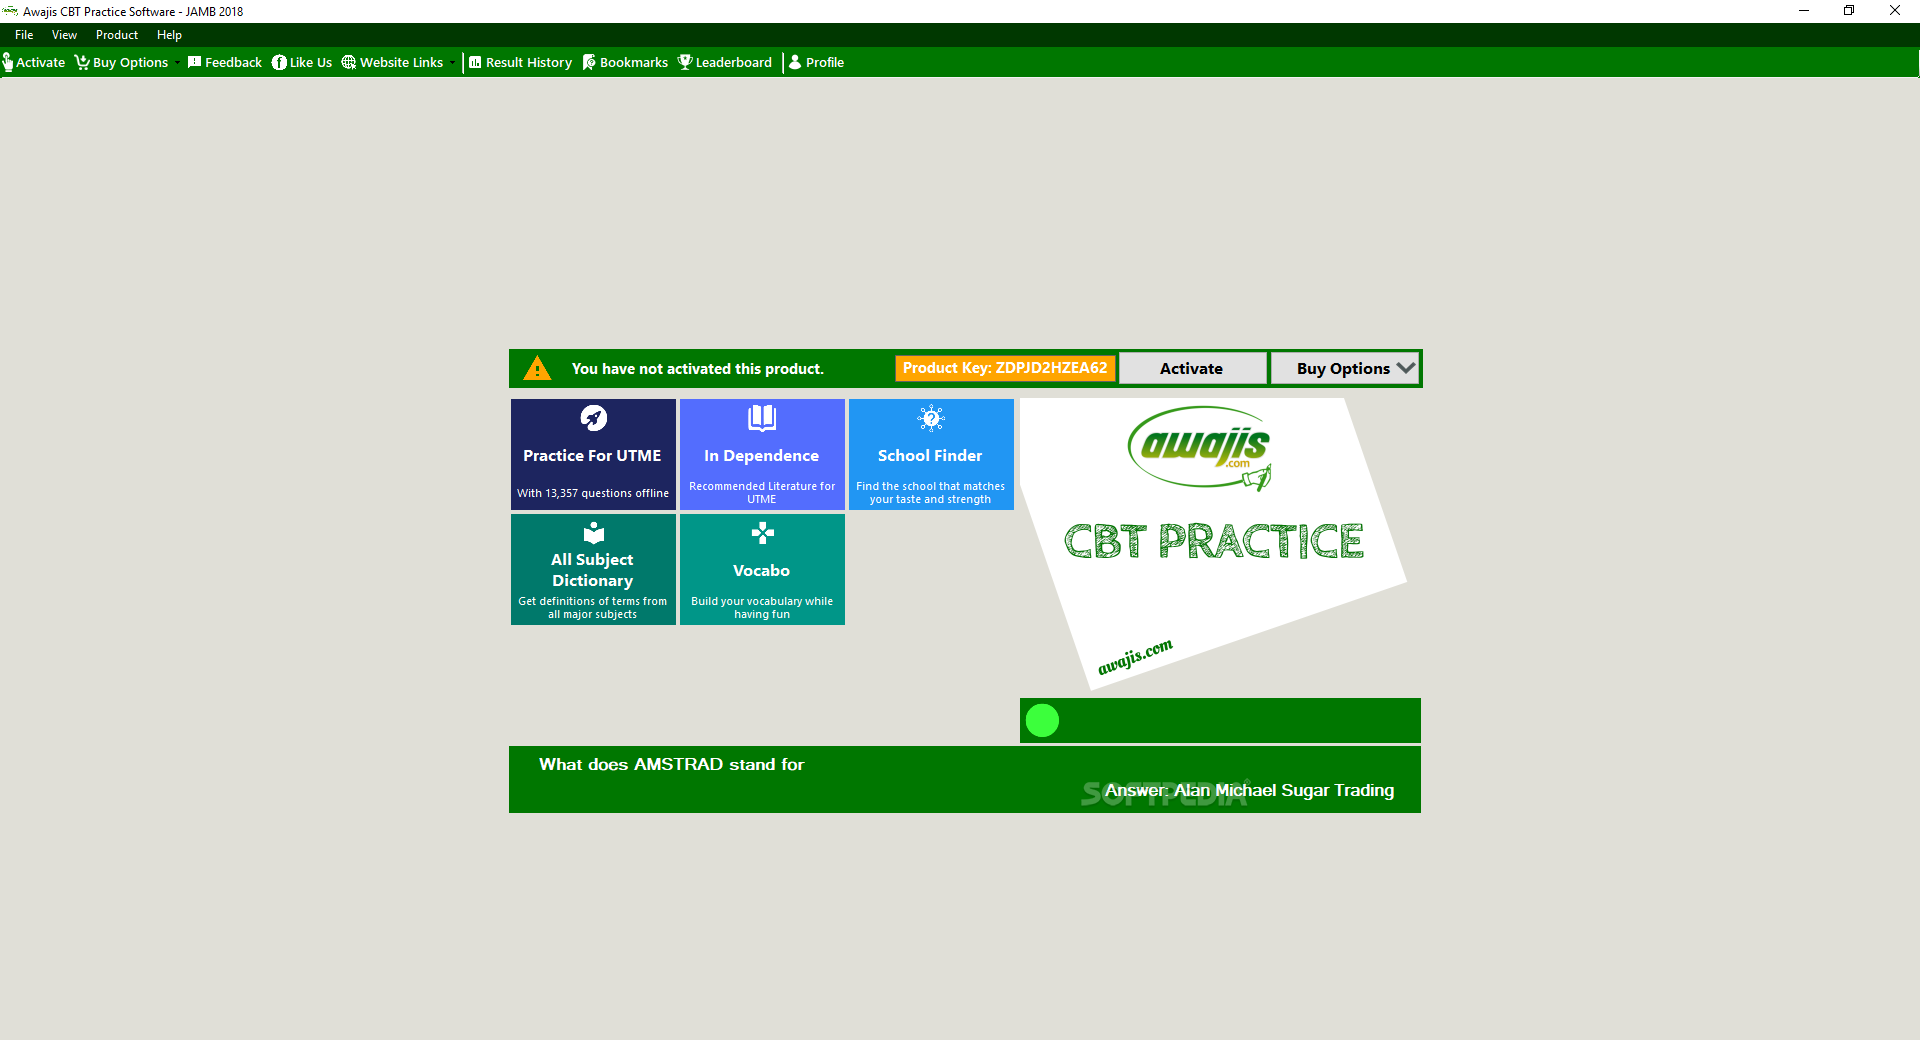 Top 23 Others Apps Like Awajis CBT Practice Software - JAMB - Best Alternatives